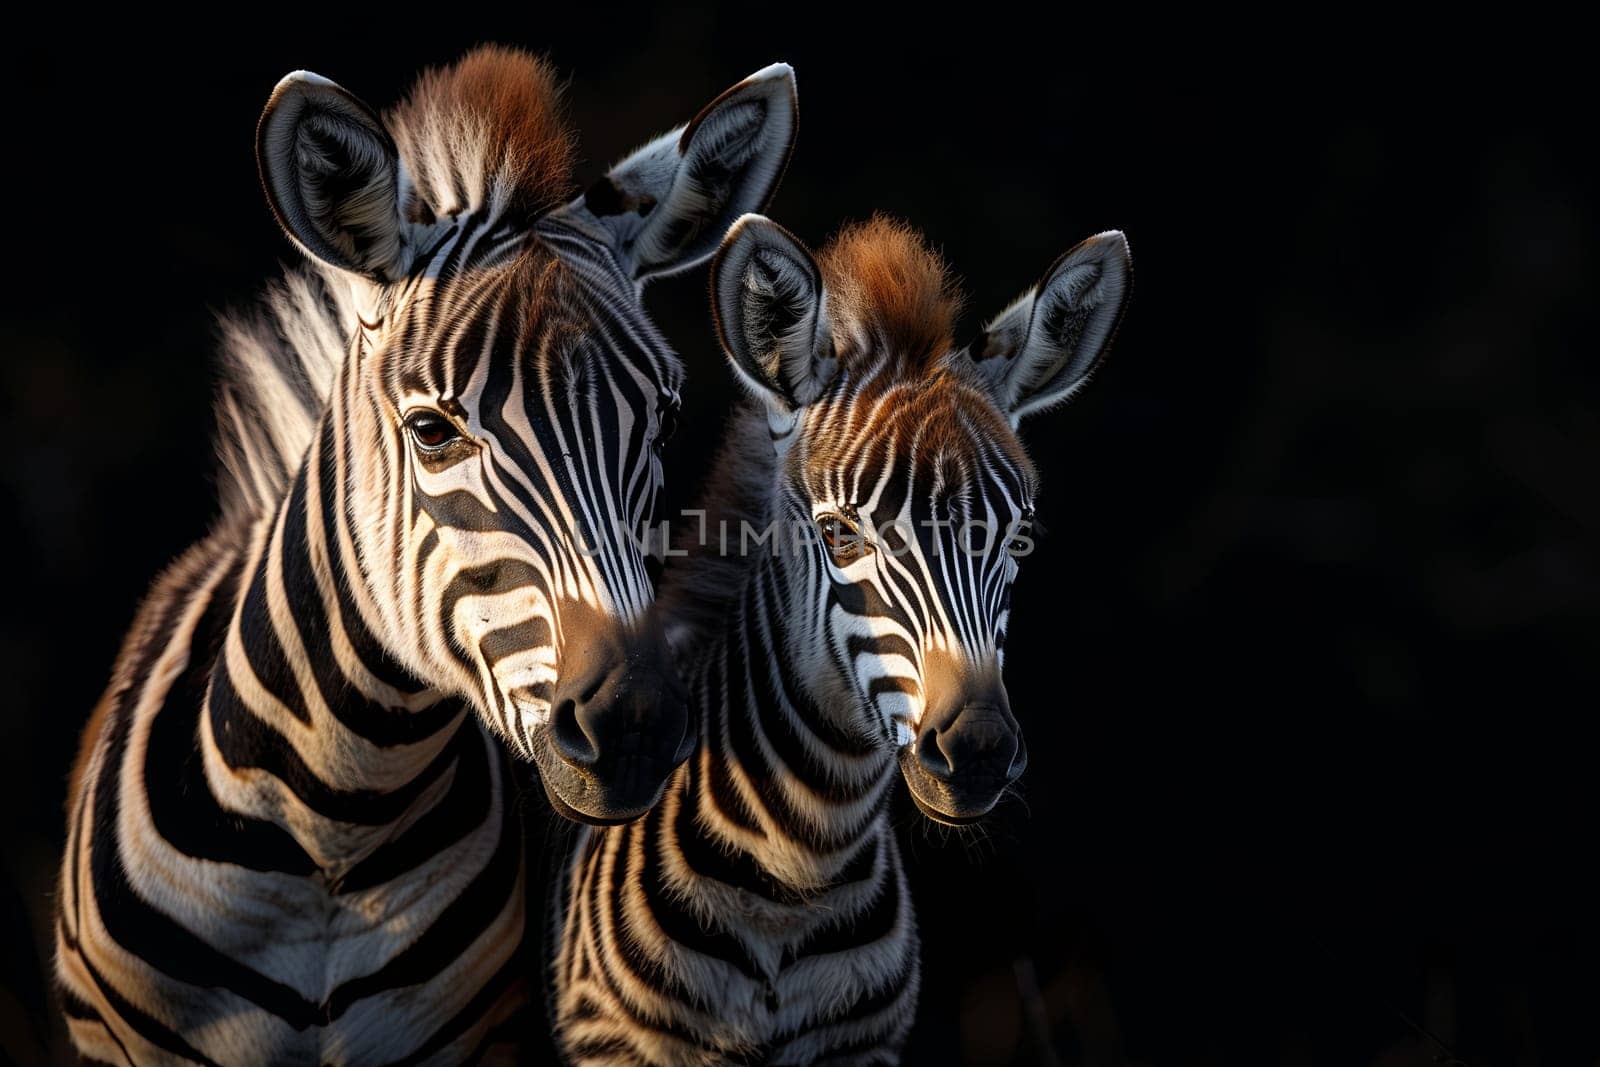 Two fawncolored zebras standing fluidly next to each other, their electric blue stripes creating a striking pattern against the darkness of the background